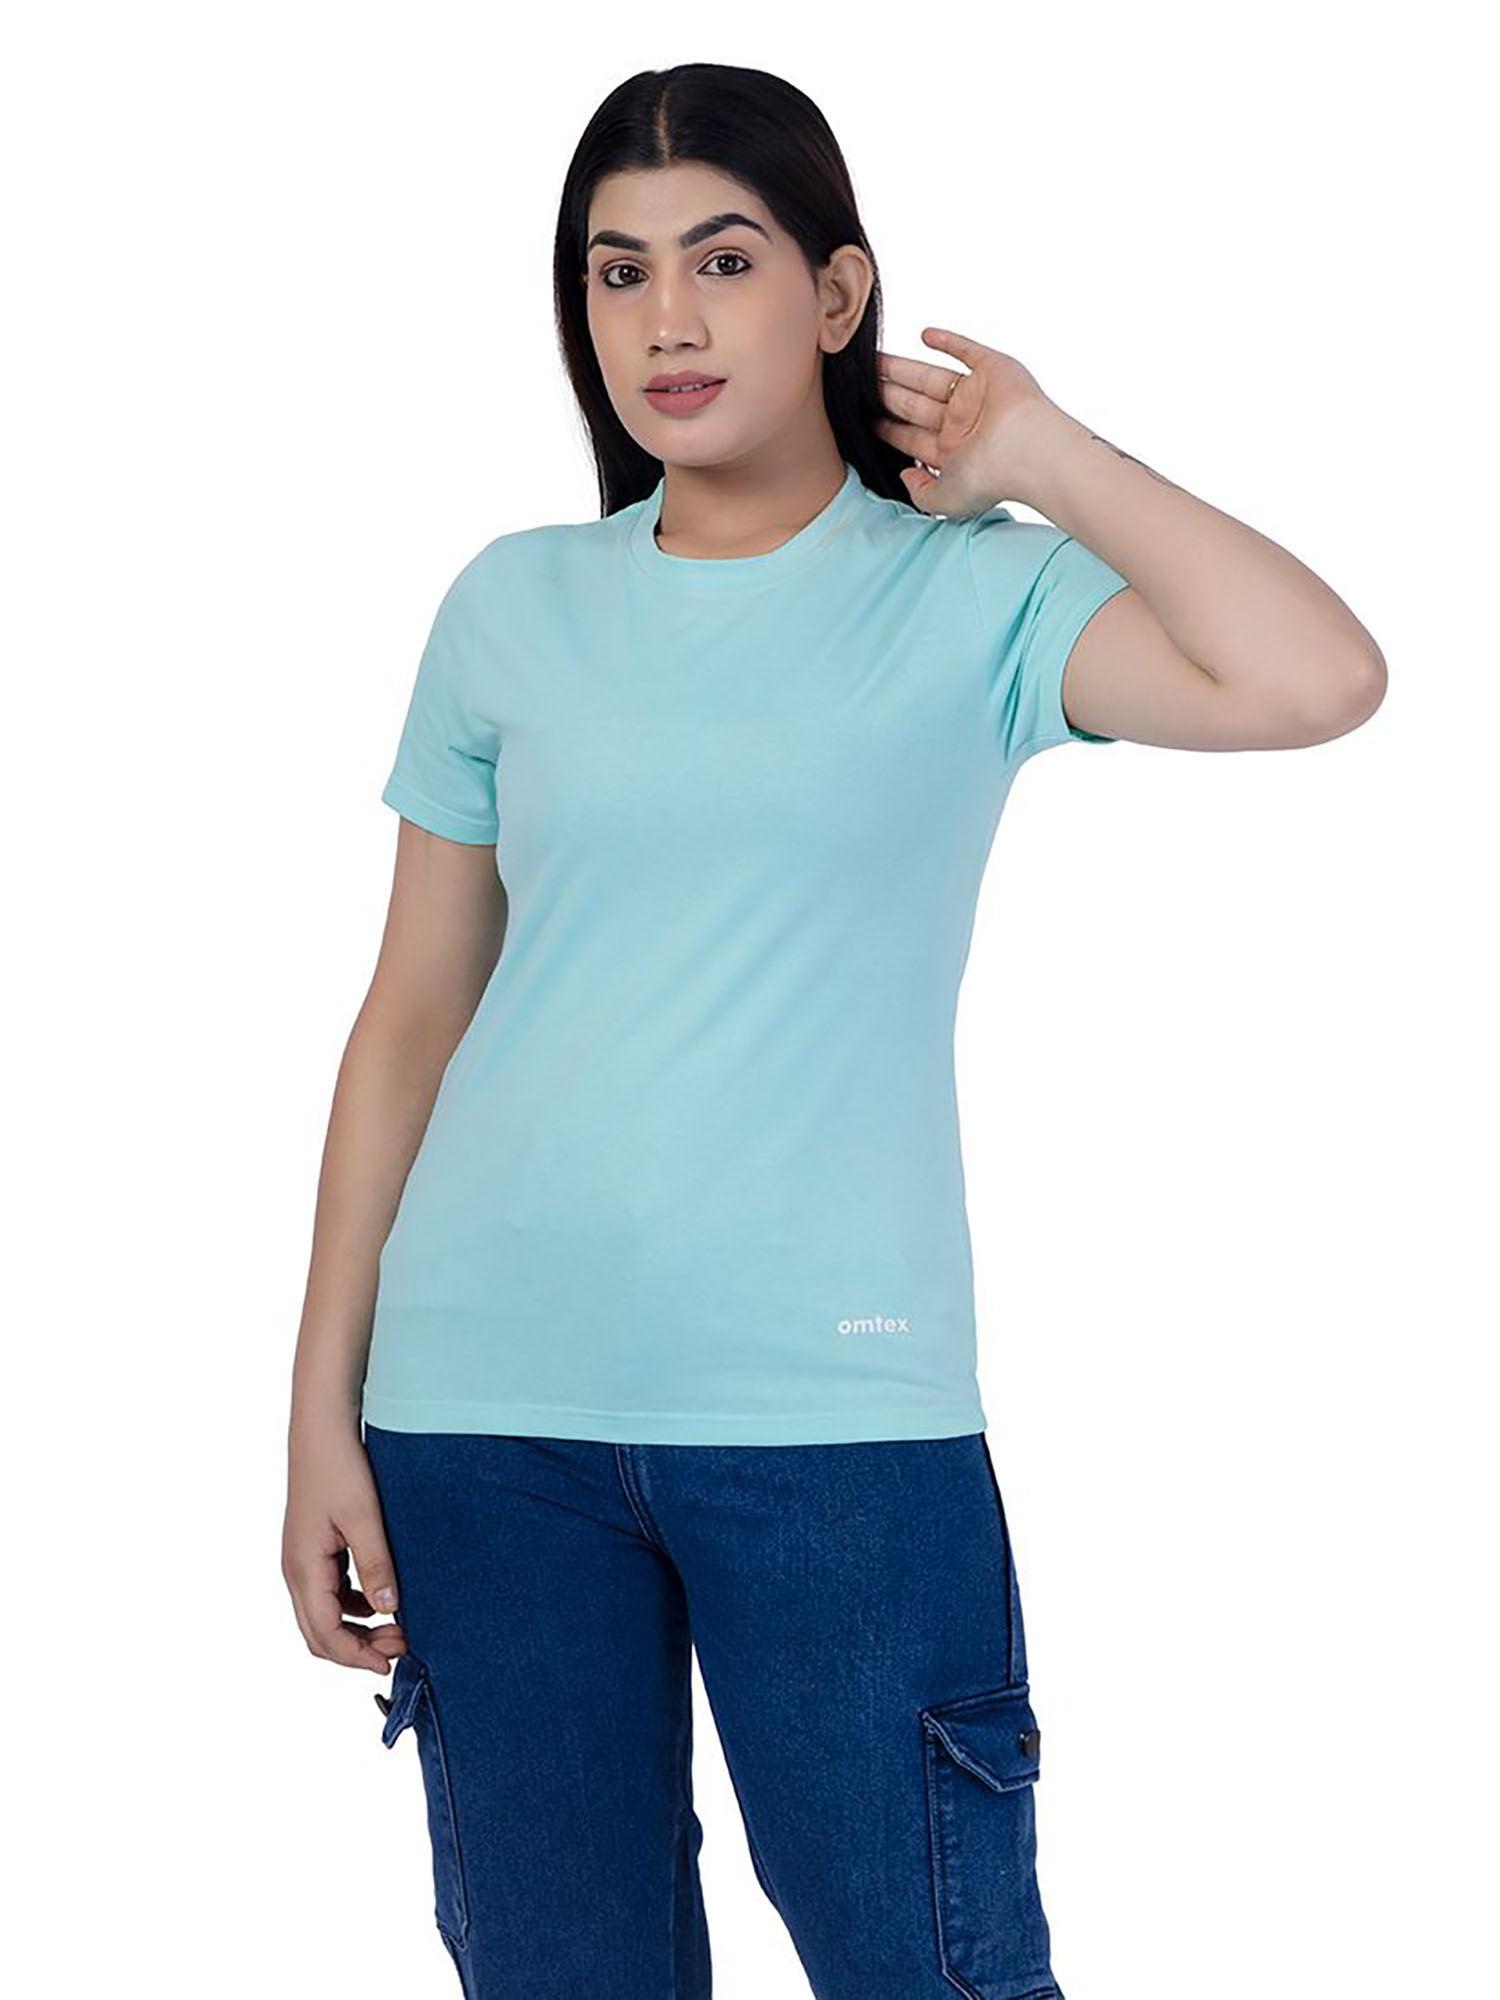 fitness sports round neck activewear t shirt for women turquoise